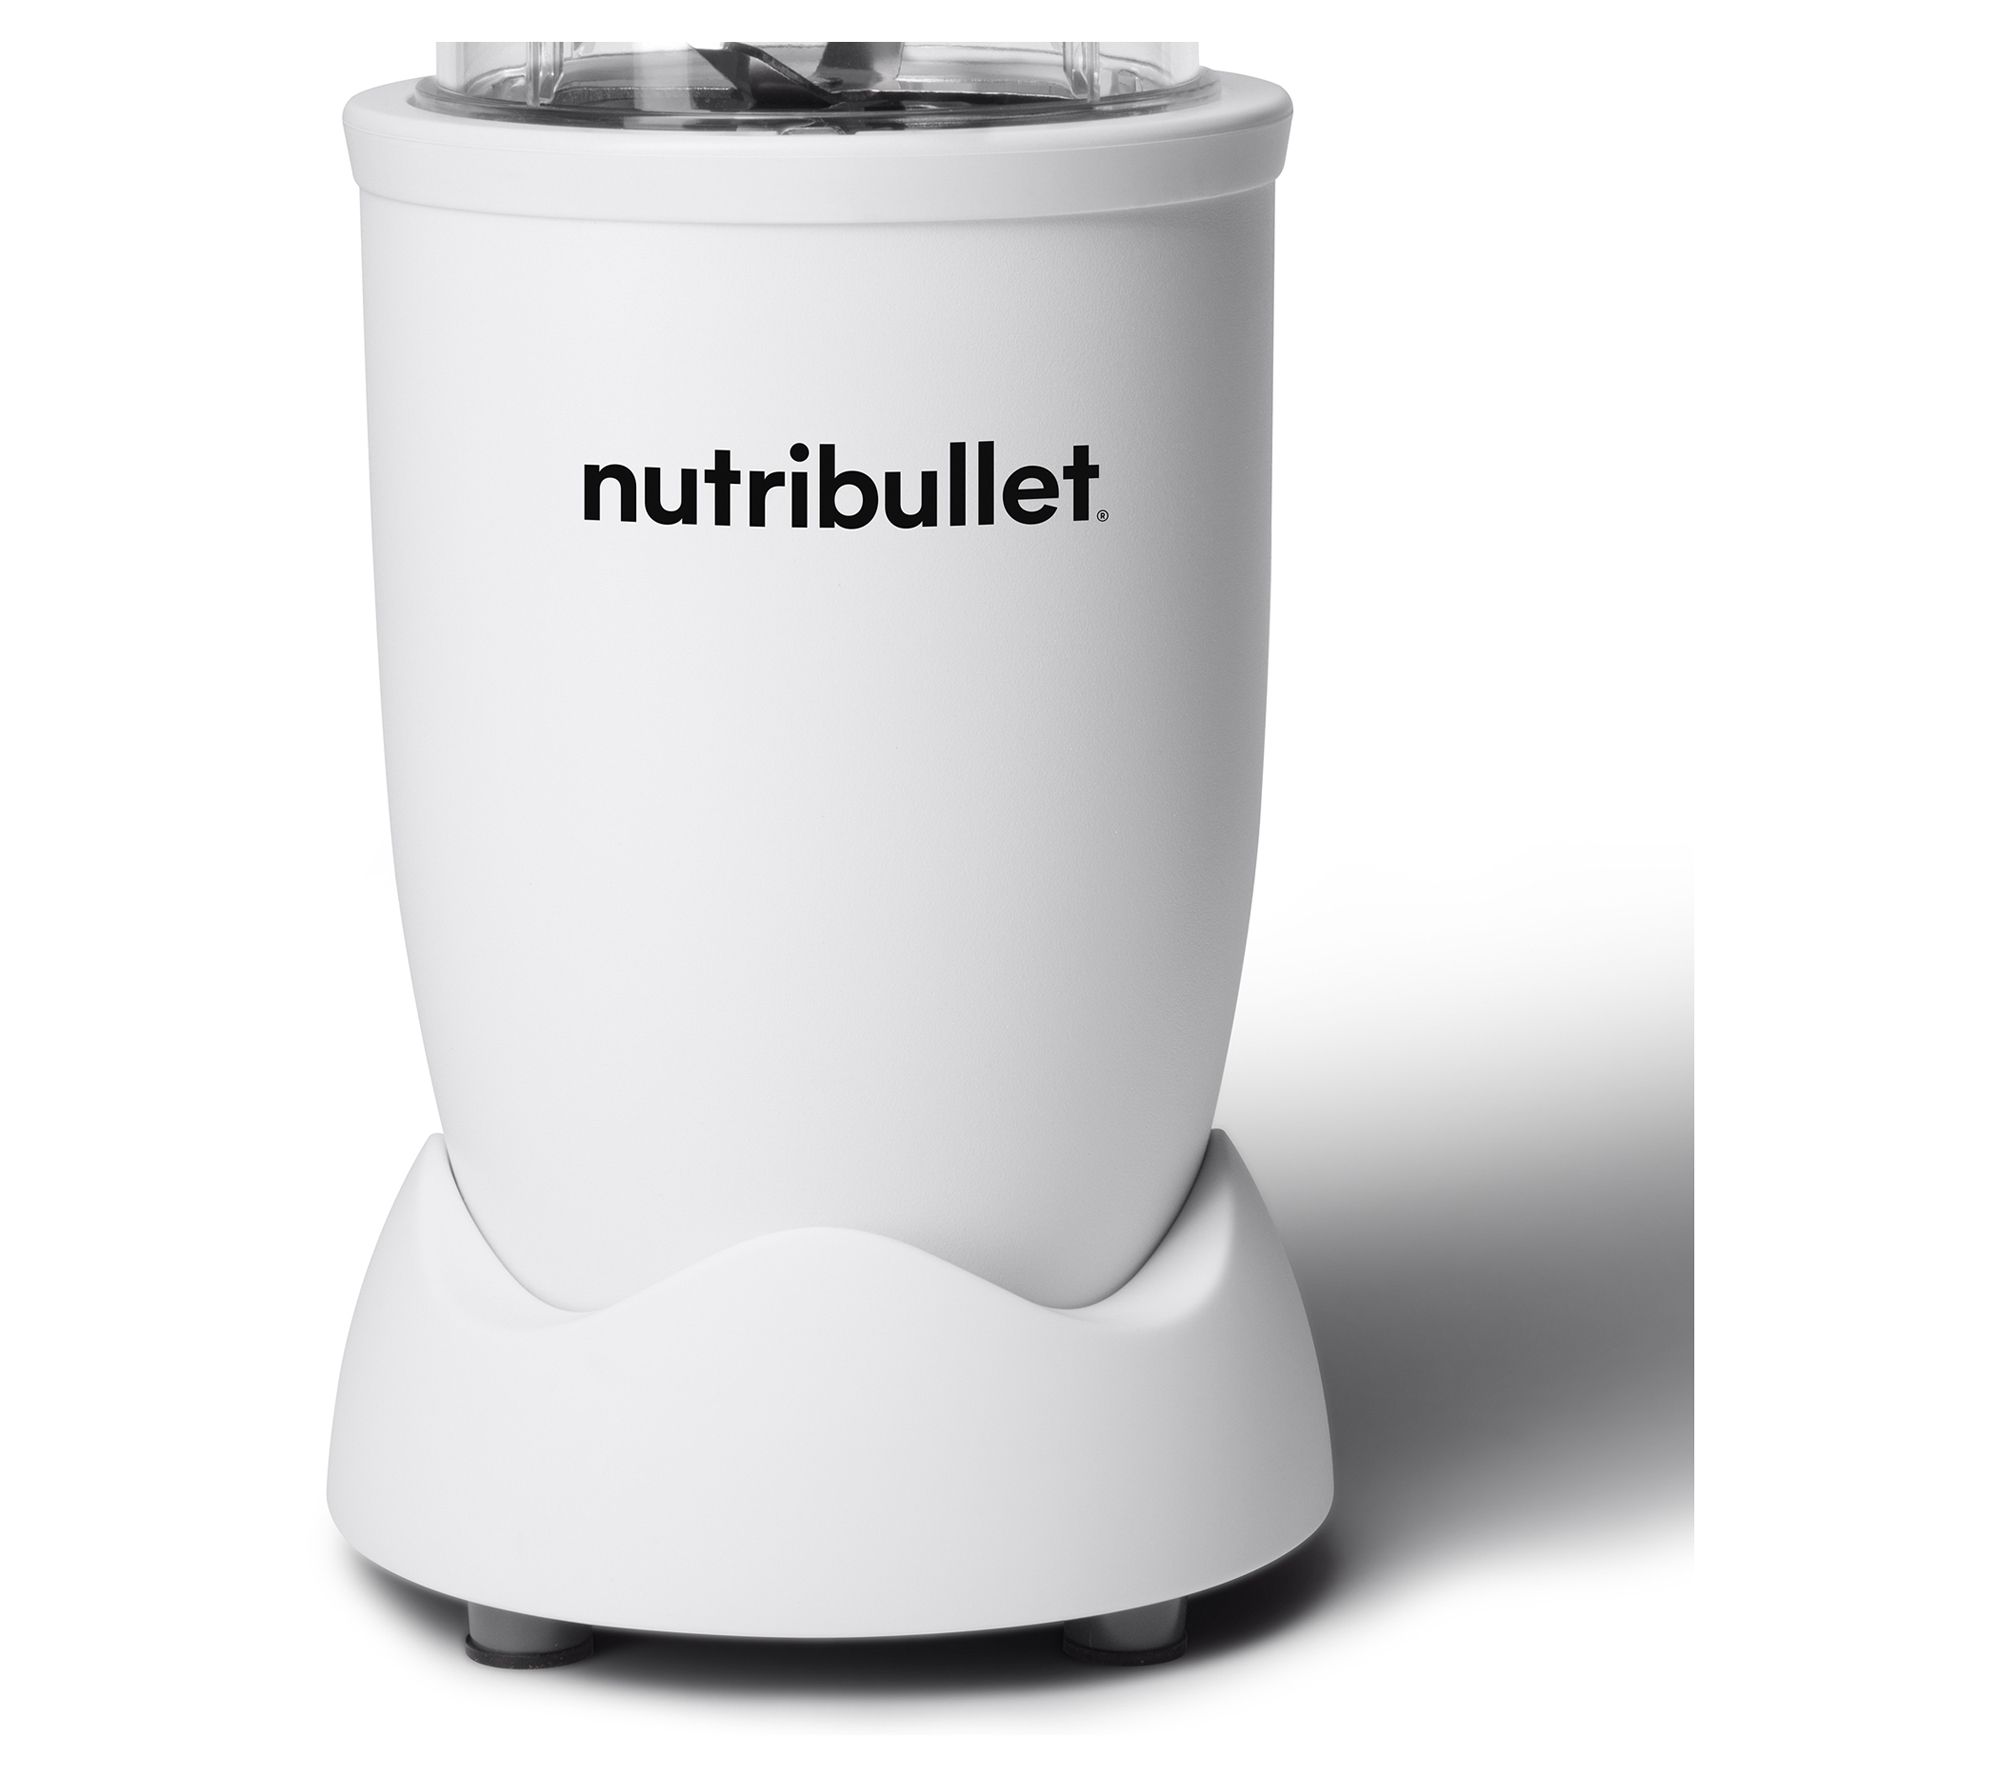 NutriBullet Pro 900 Series review: Set your sights away from the